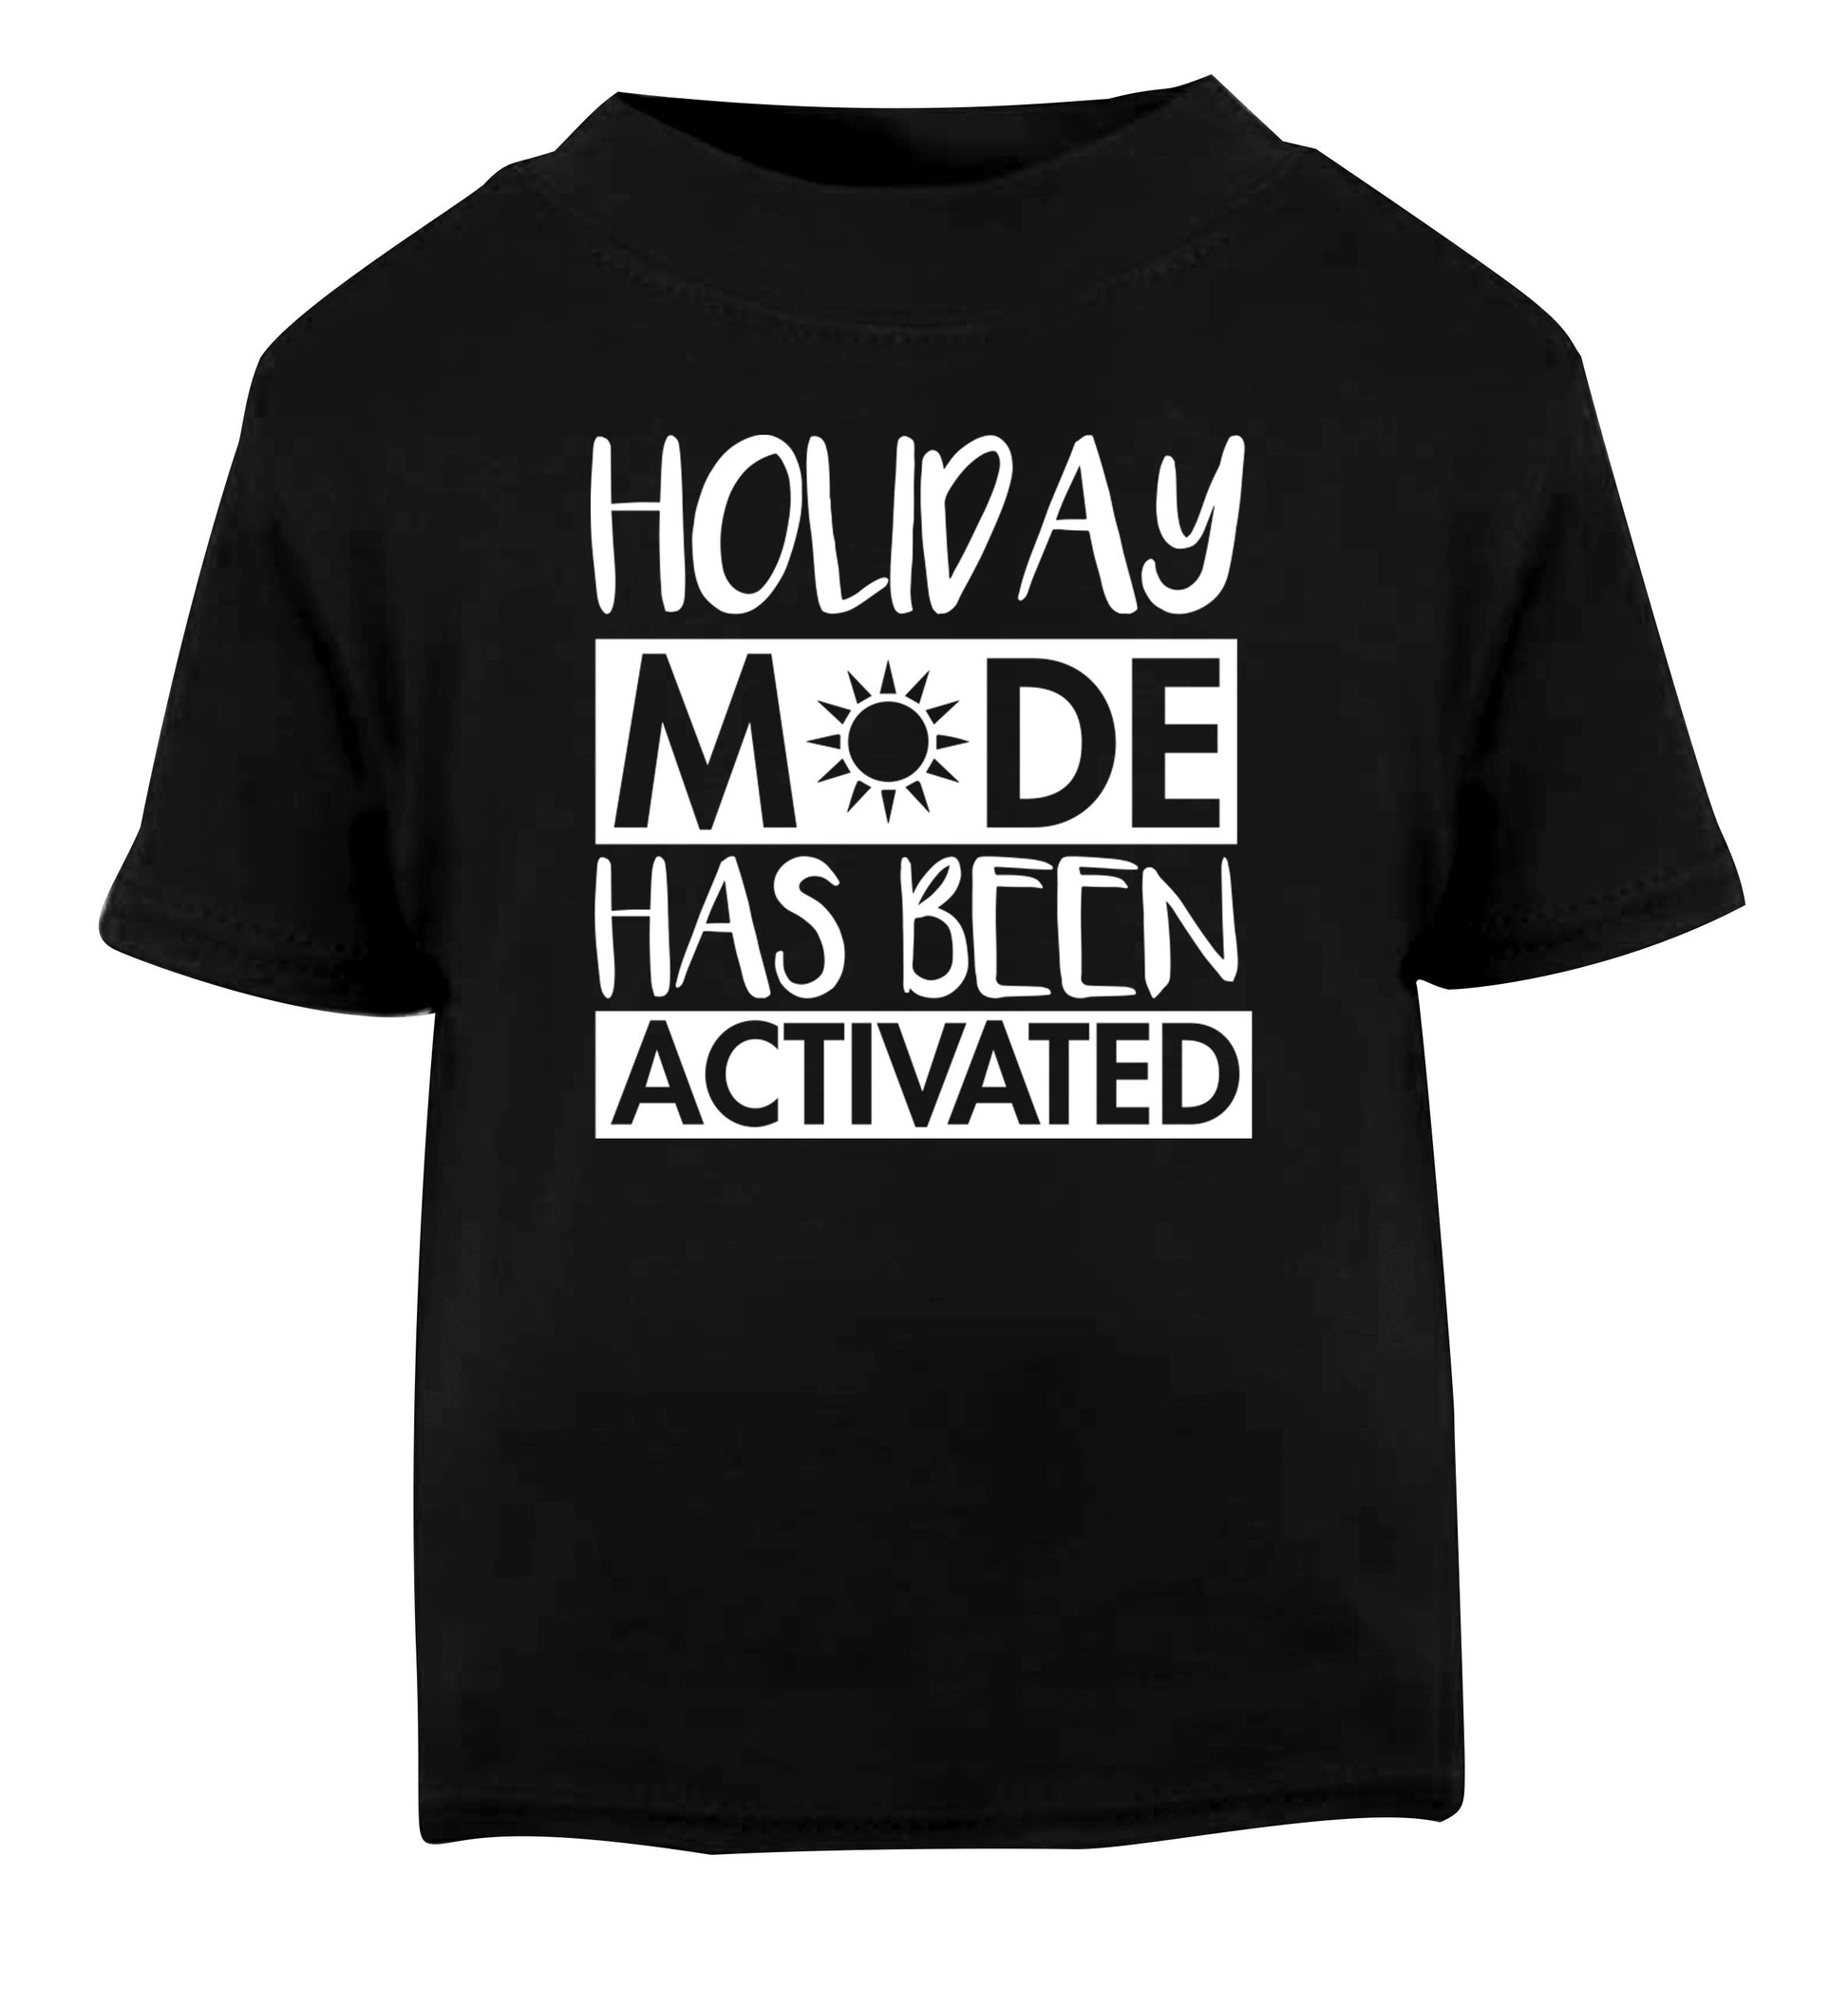 Holiday mode has been activated Black Baby Toddler Tshirt 2 years